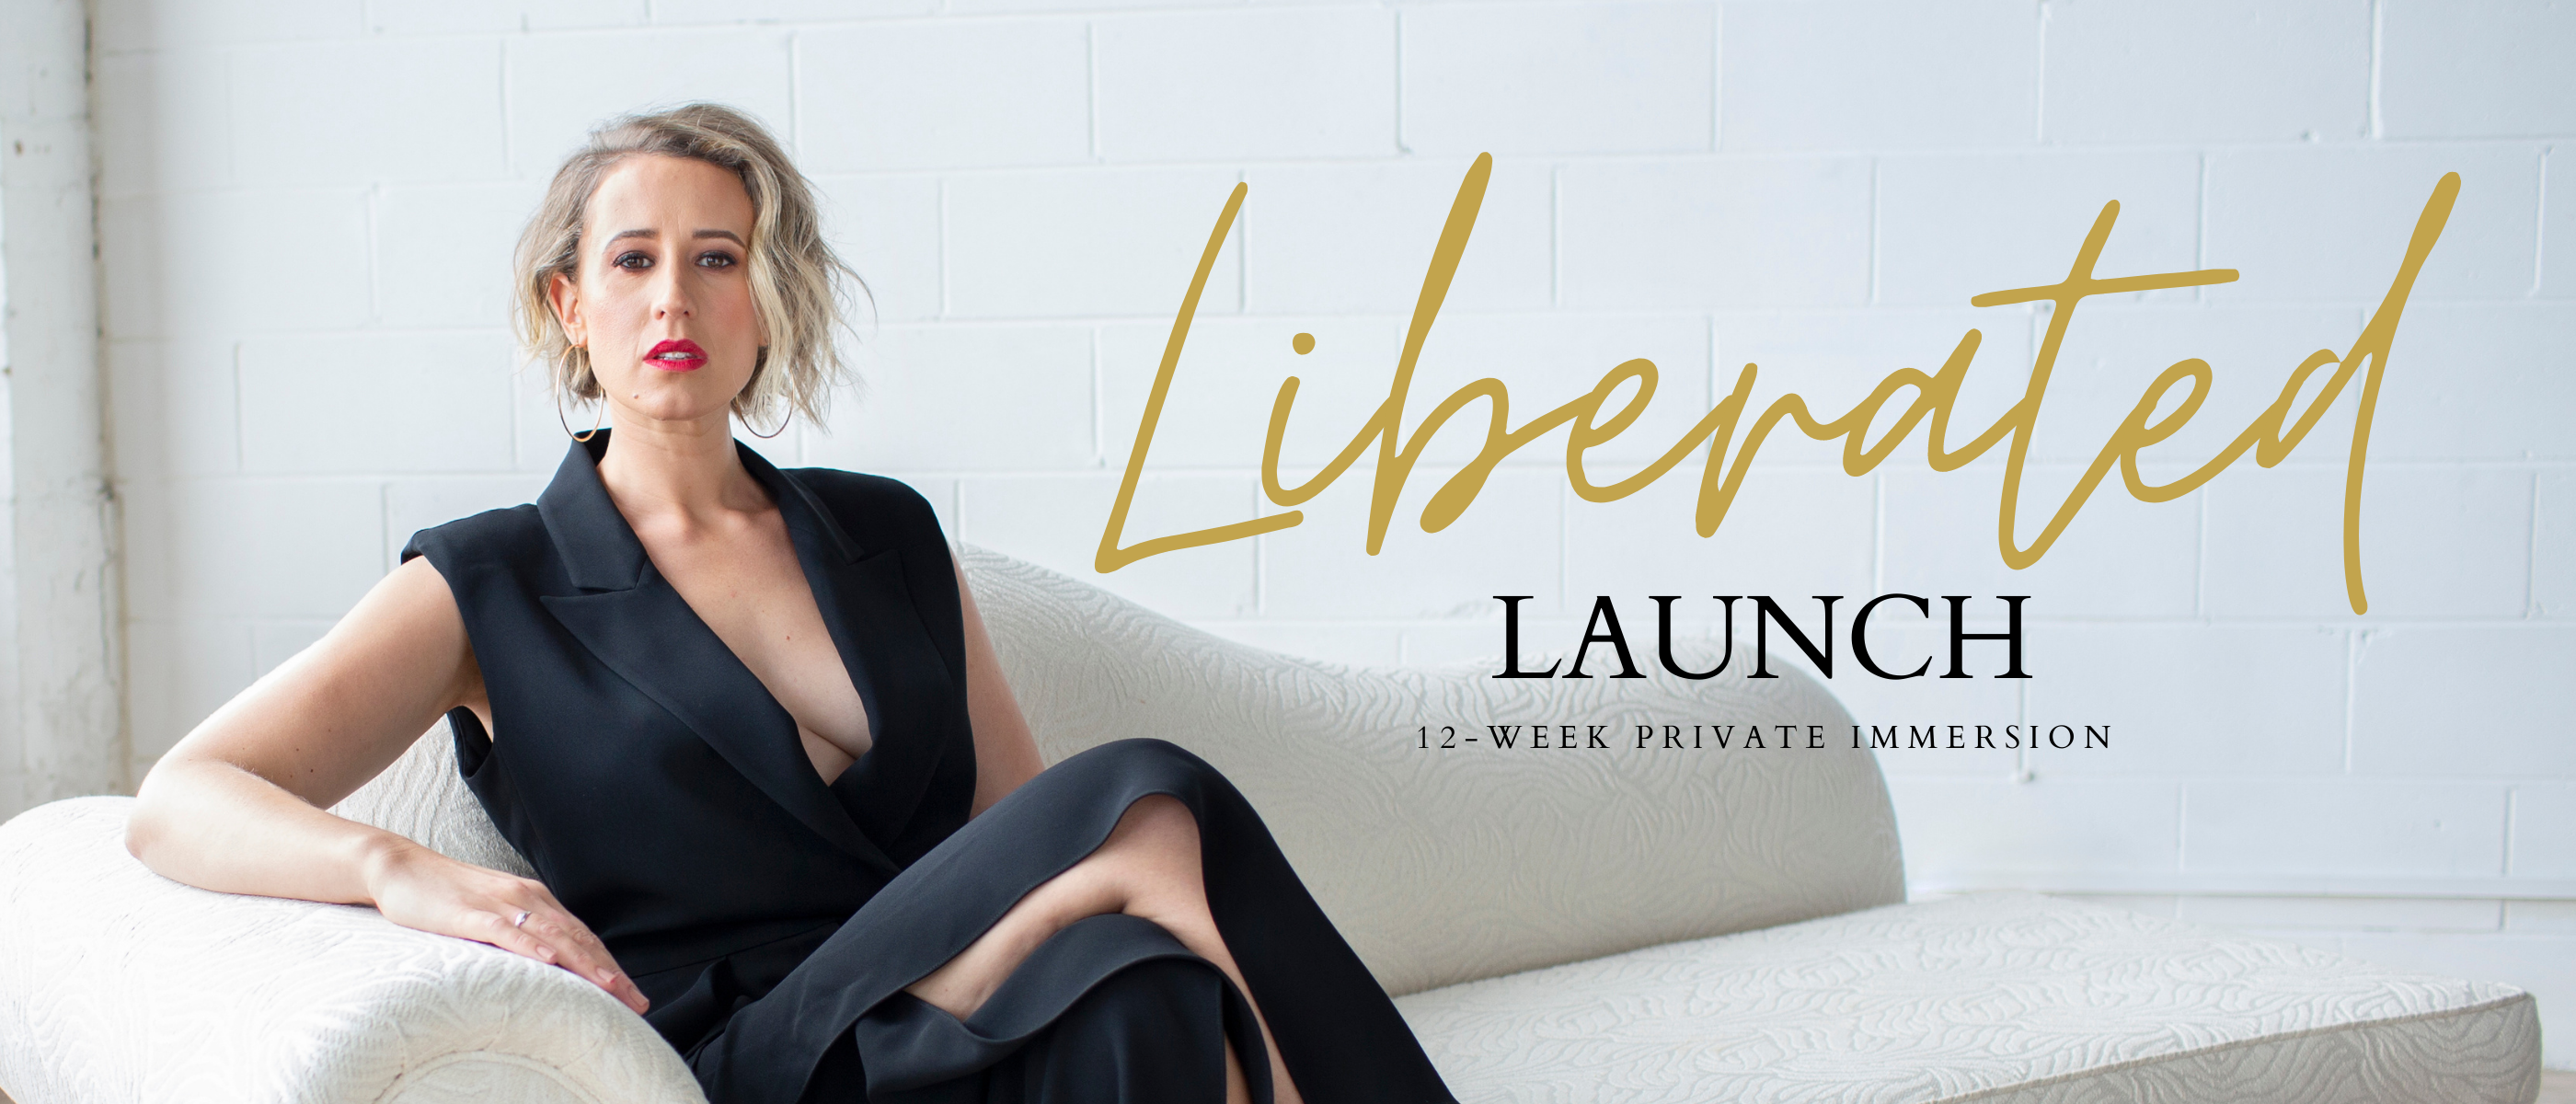 Liberated Launch